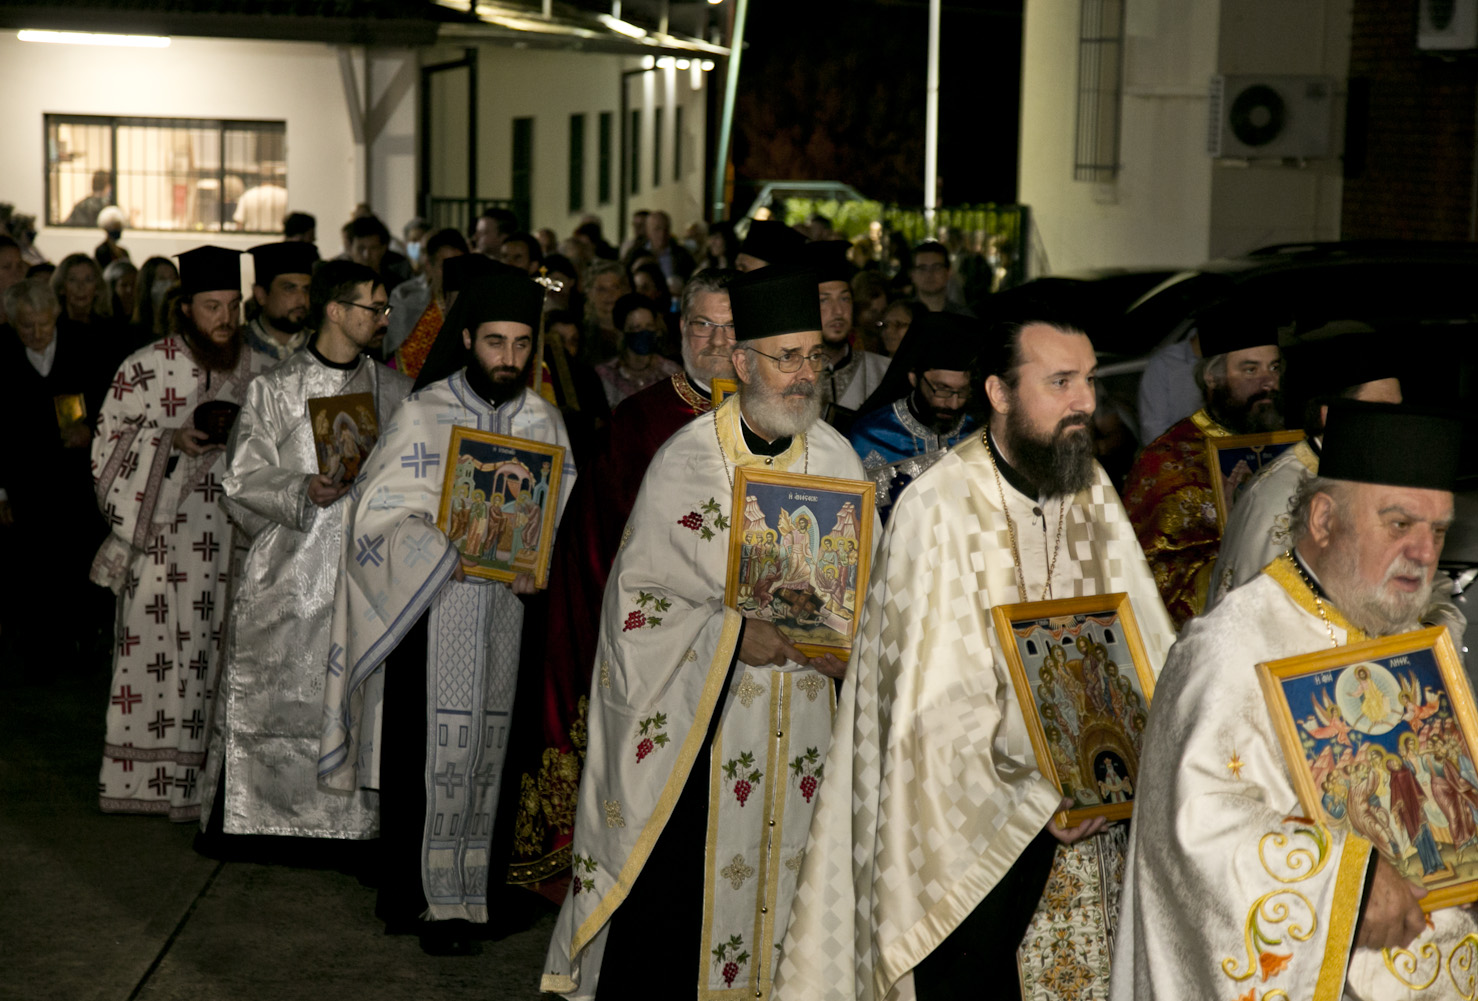 Sunday of Orthodoxy - Presided by his Grace, Bishop Christodoulos of Magnesia